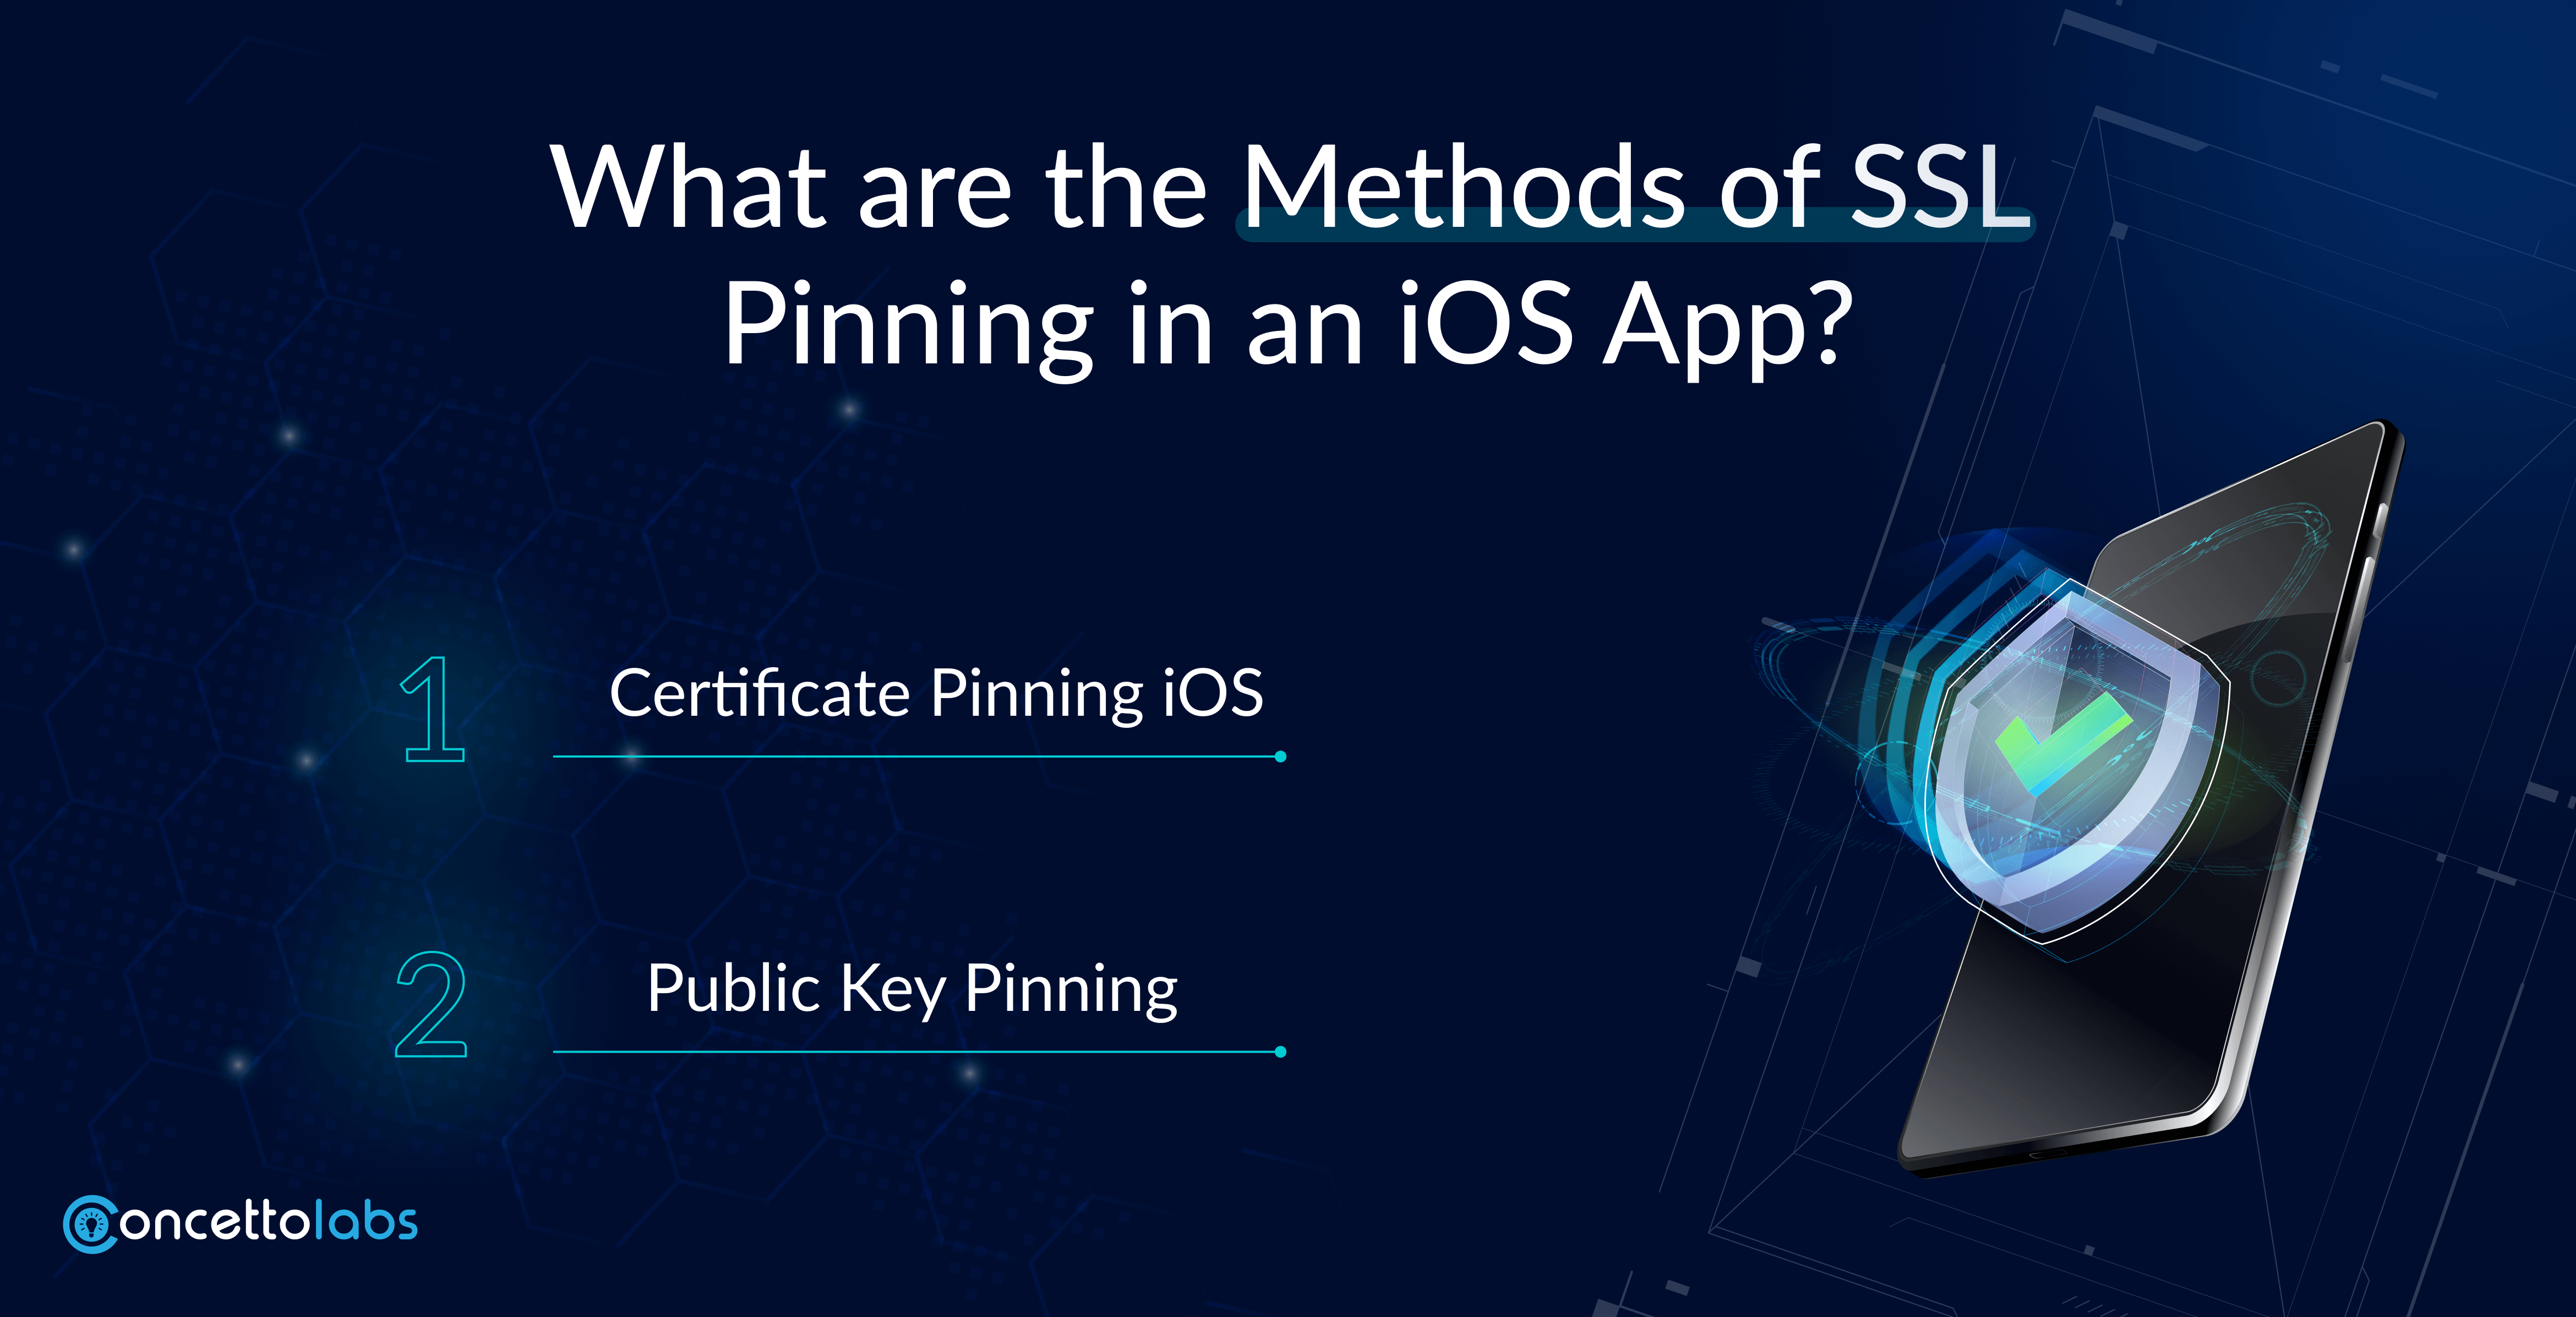 What are the Methods of SSL Pinning in an iOS App?